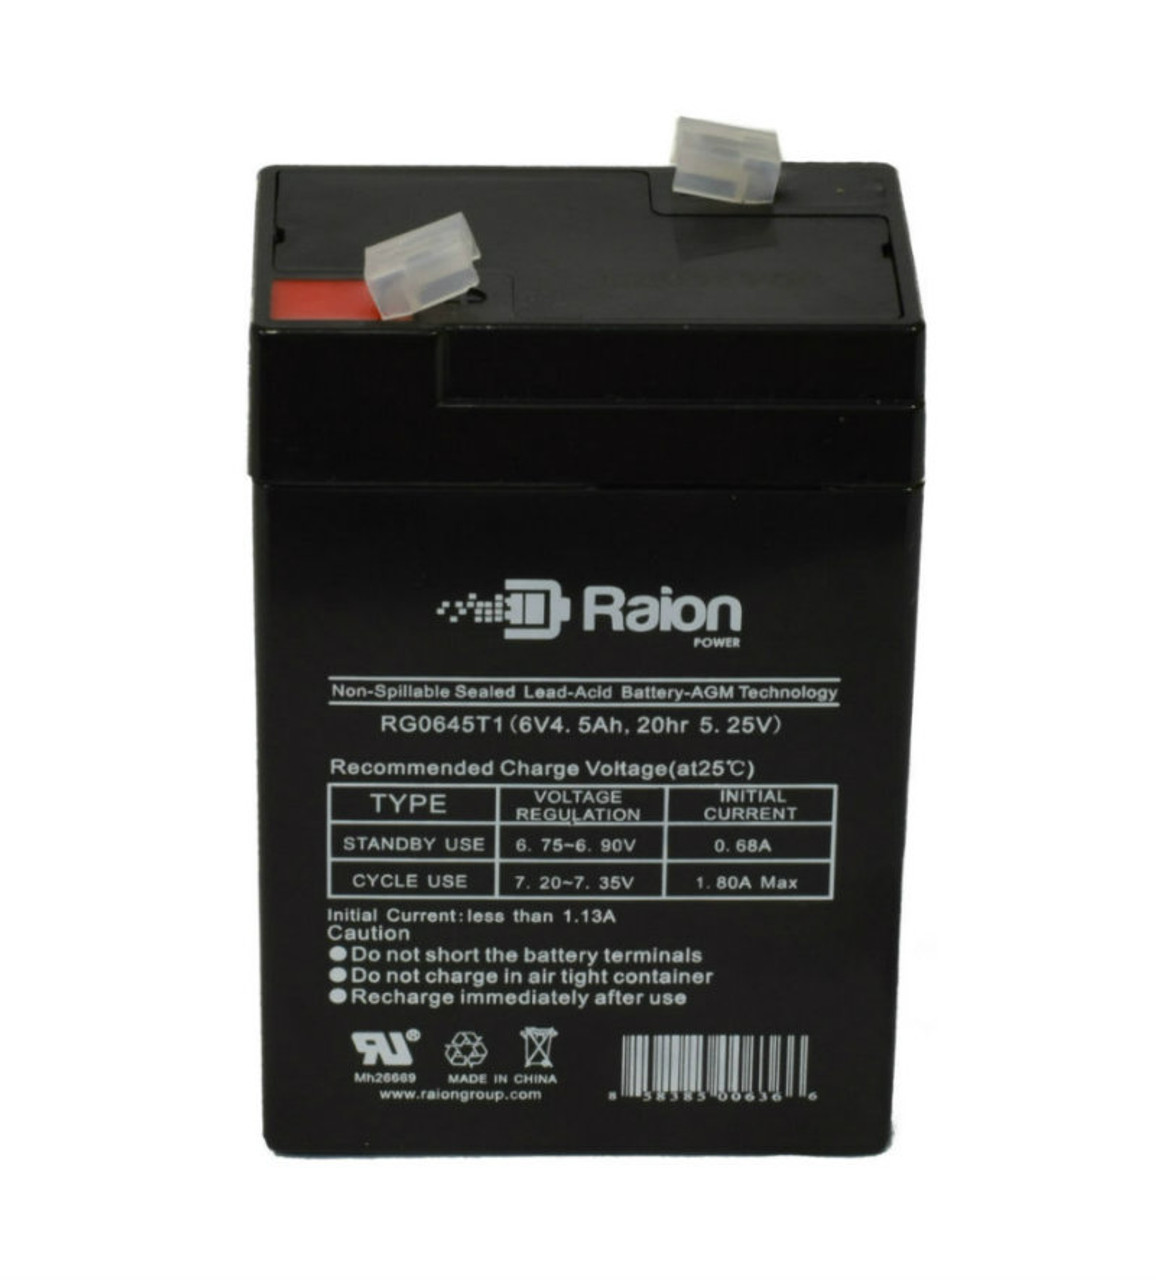 Raion Power RG0645T1 Replacement Battery Cartridge for ELS 6VLC4